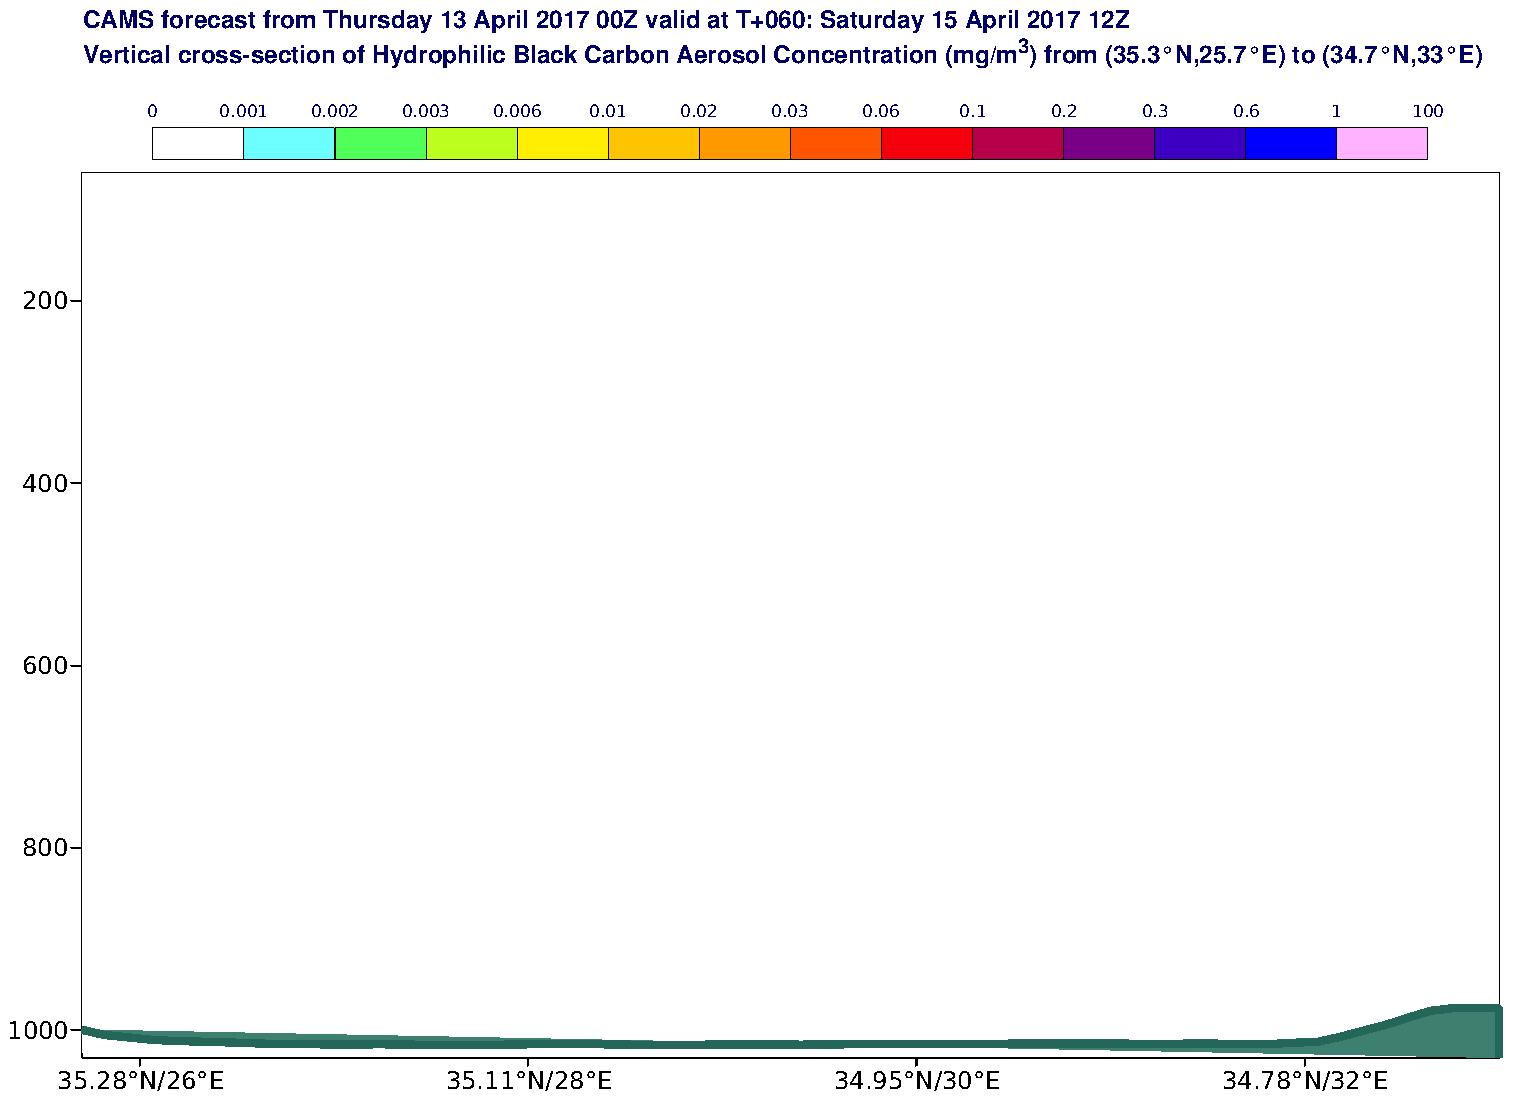 Vertical cross-section of Hydrophilic Black Carbon Aerosol Concentration (mg/m3) valid at T60 - 2017-04-15 12:00